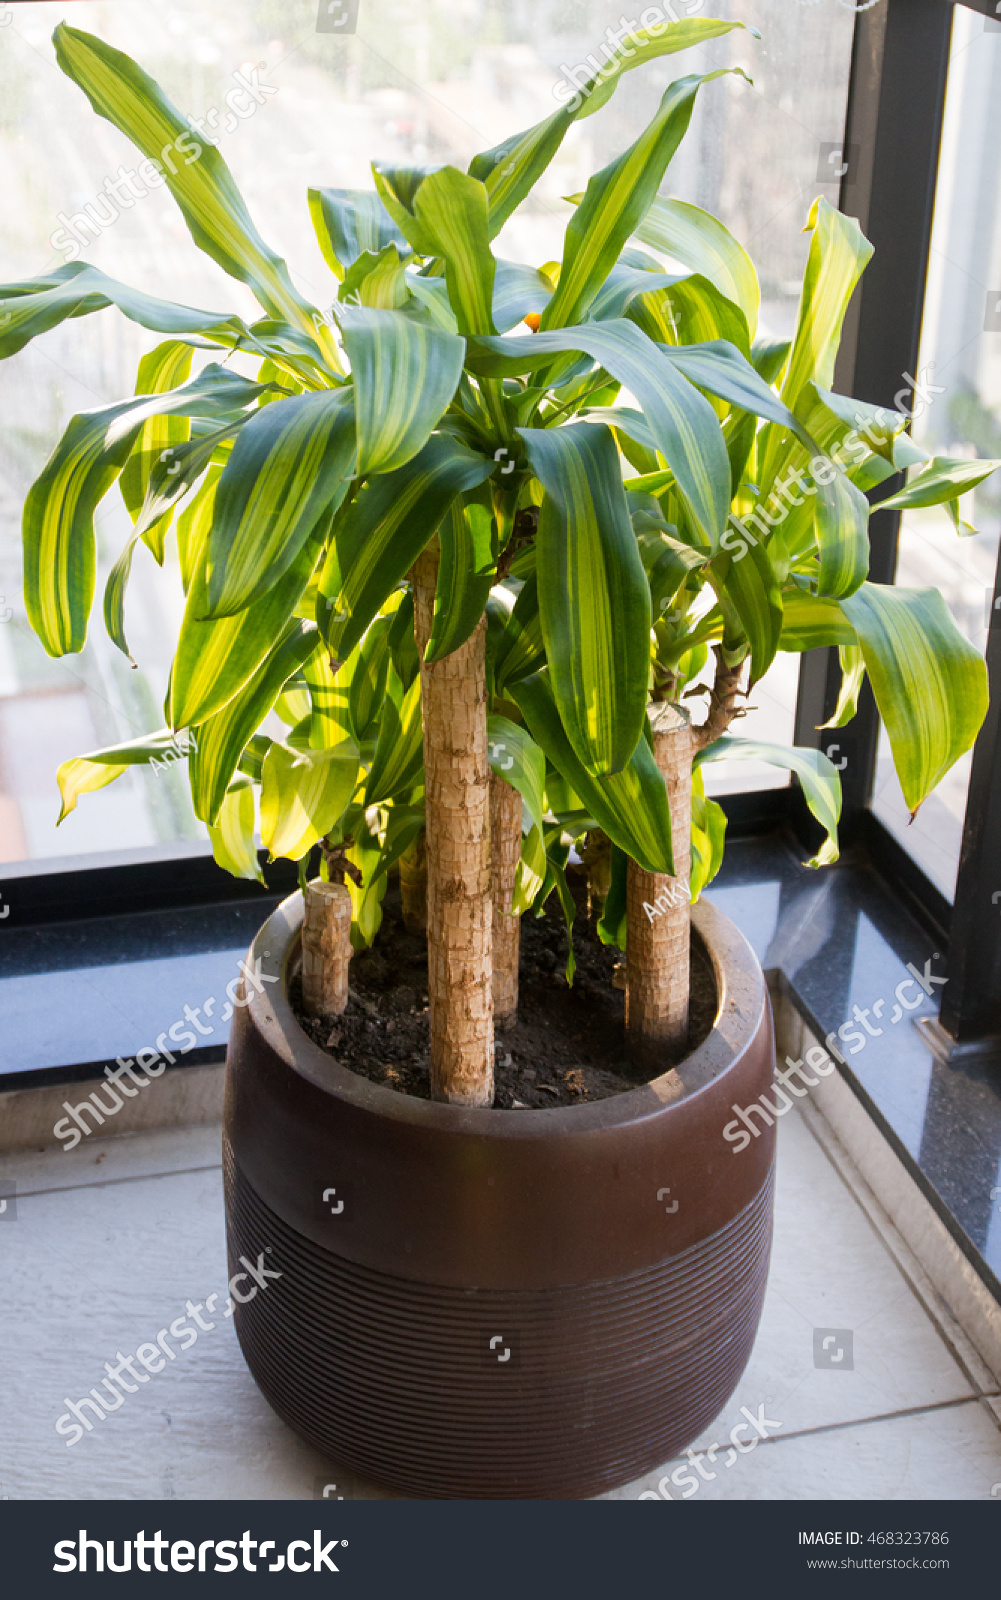 Dracaena fragrans (The Yellow Corn Plant) in a pot on a terrace #468323786